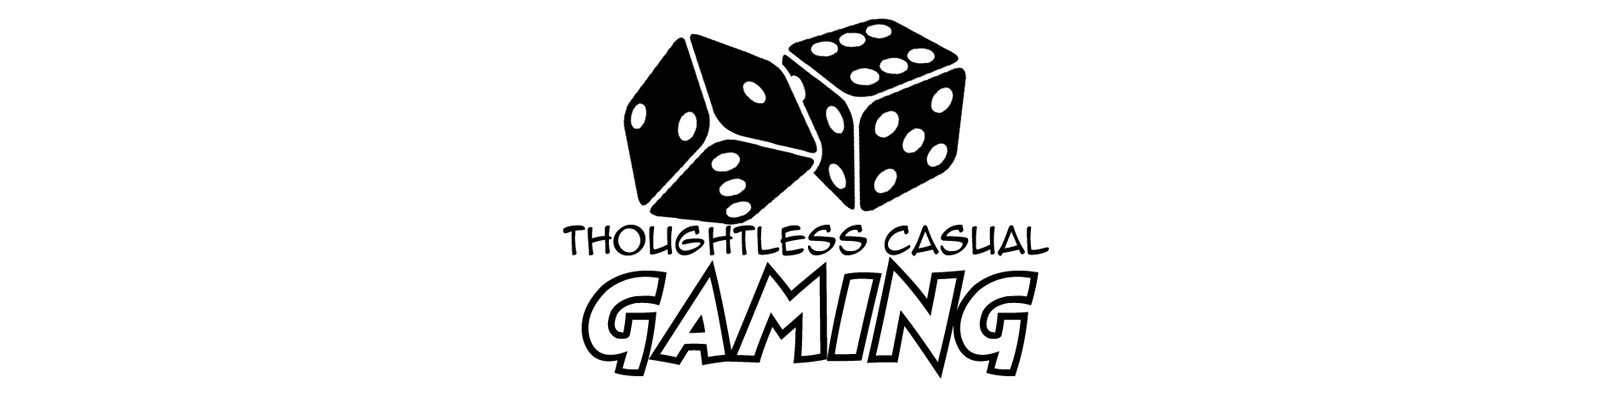 Thoughtless Casual Gaming